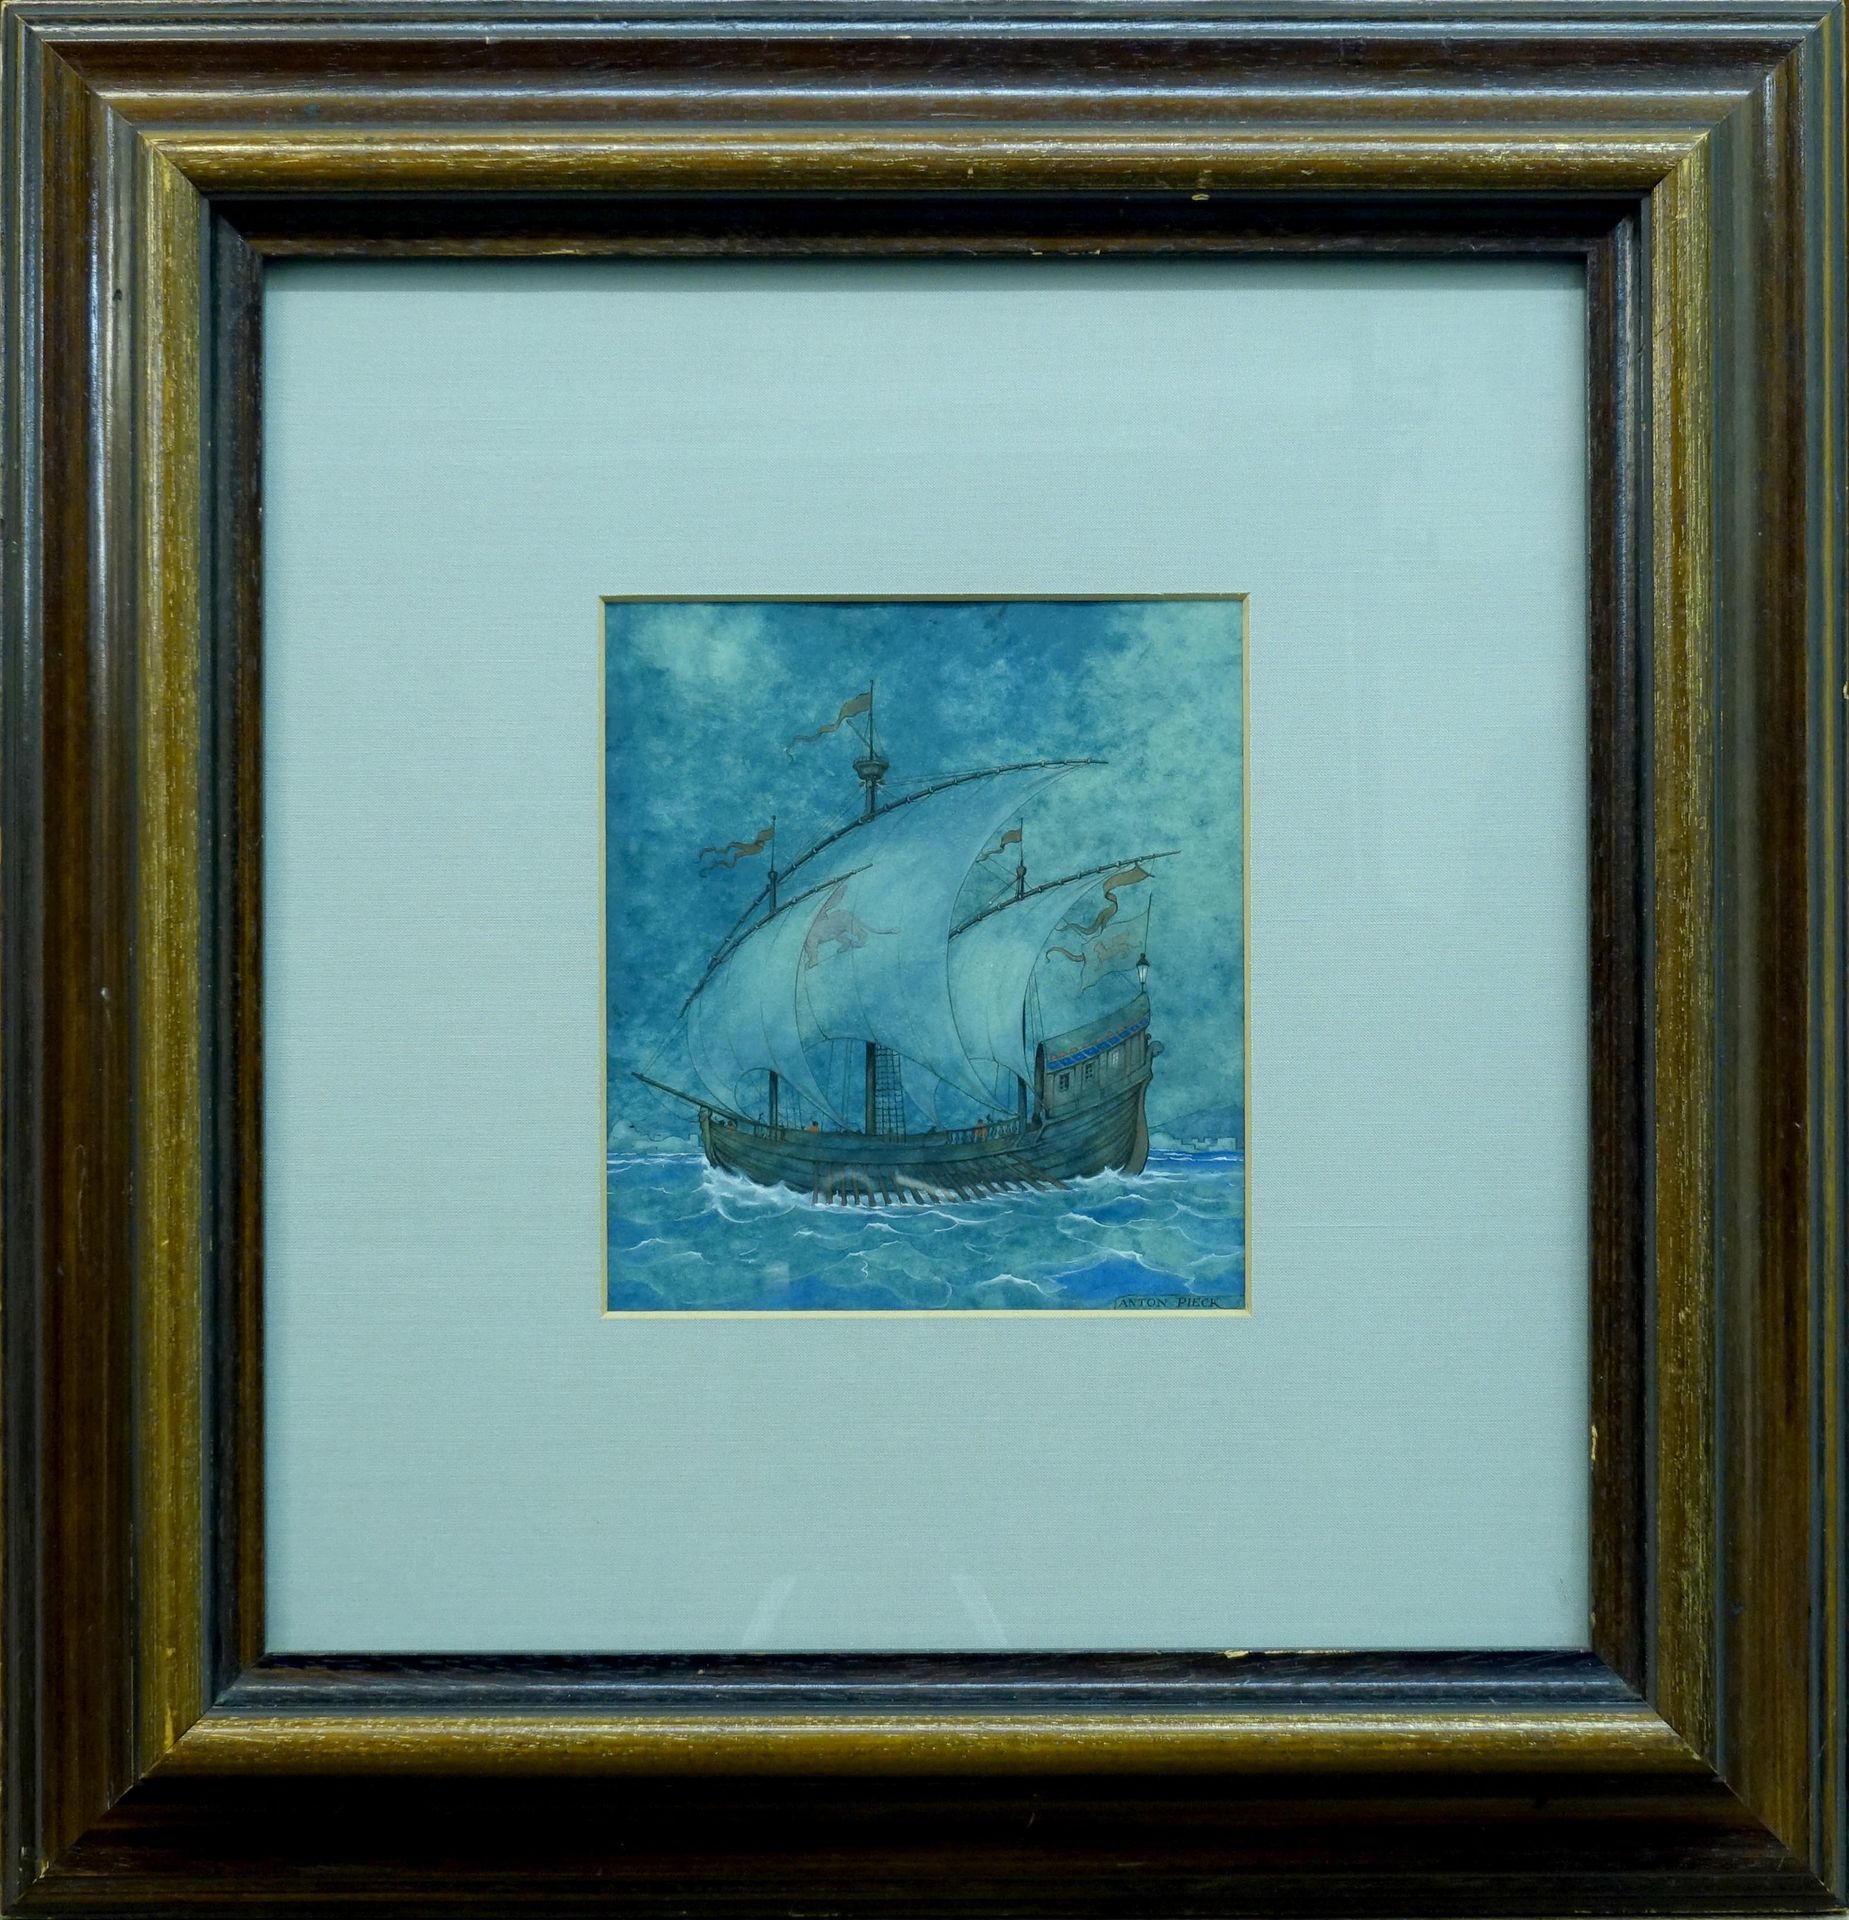 Anton Pieck (1895-1987). Caravel with the coat of arms of Venice. Ink, watercolo&hellip;